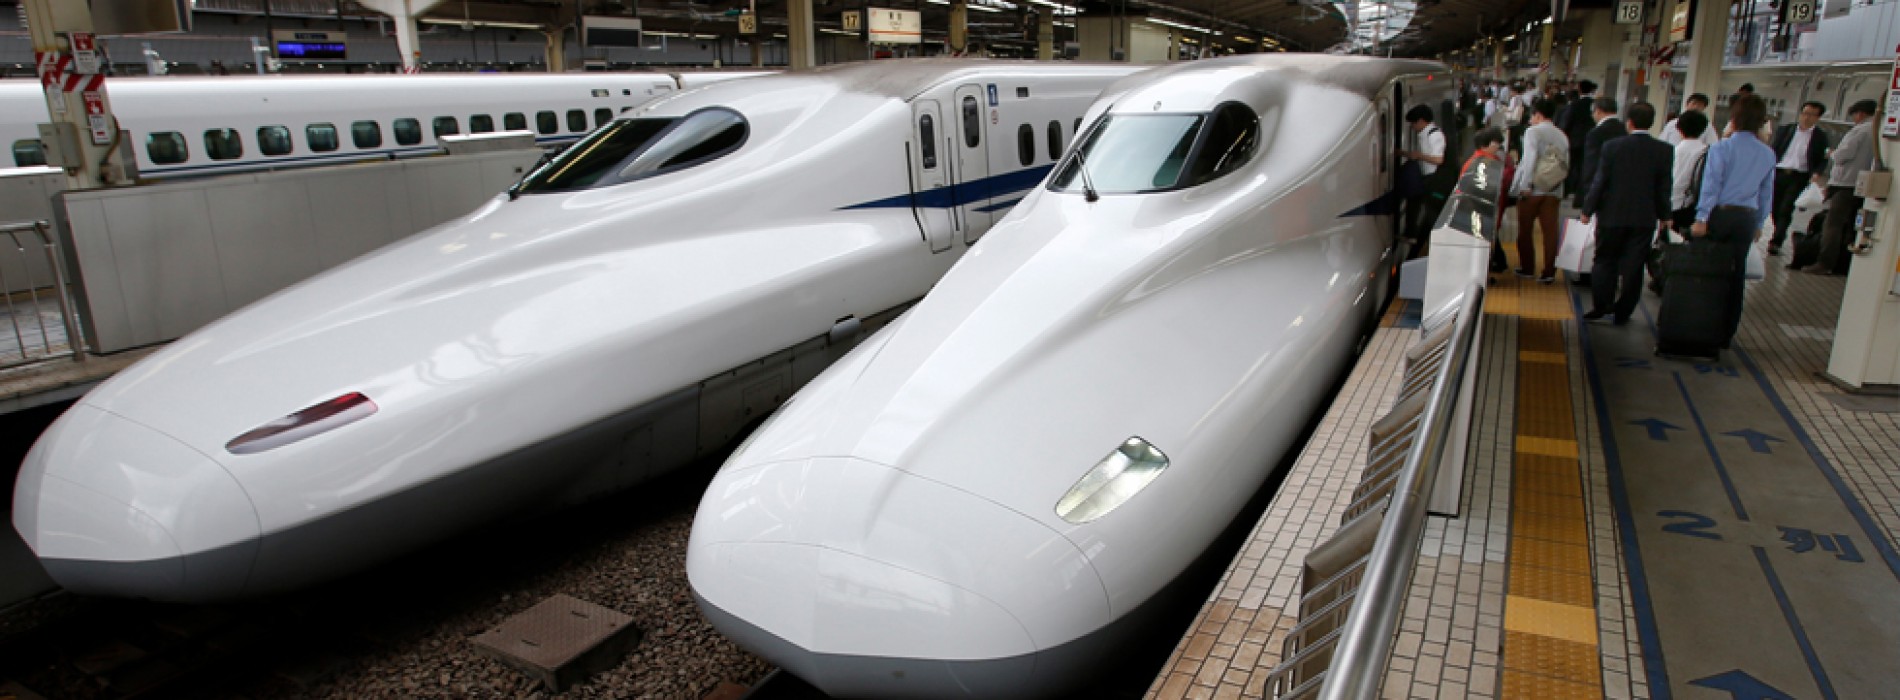 Bullet trains will transform Indian Railways says Railway Minister